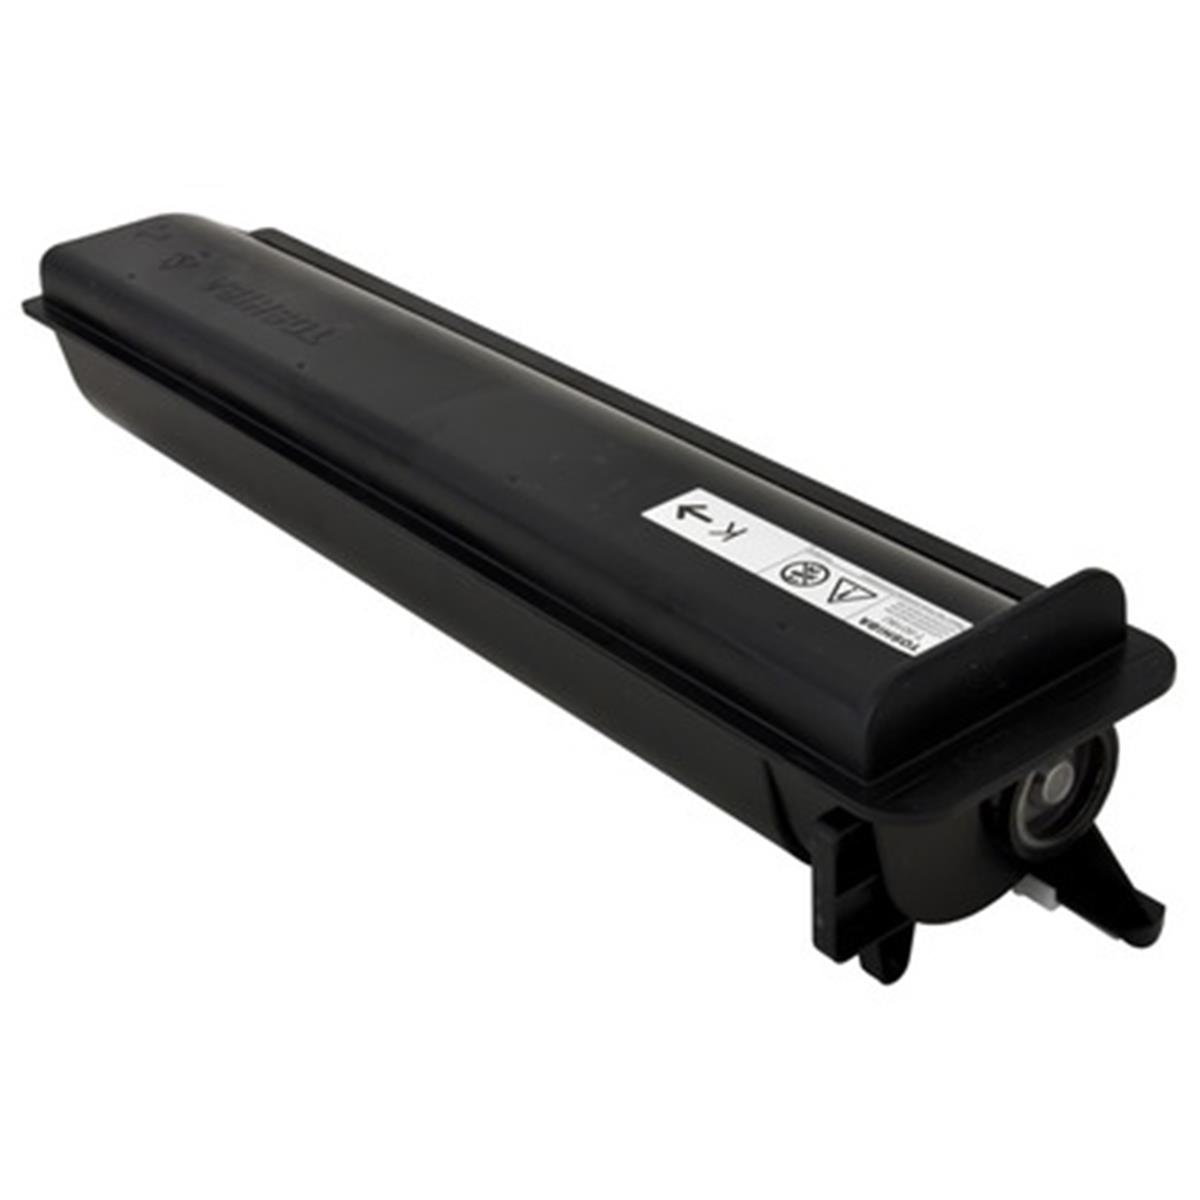 Picture of Toshiba TOST5018U E-STUDIO 2518A - Black Toner - 43,900 Page Yield